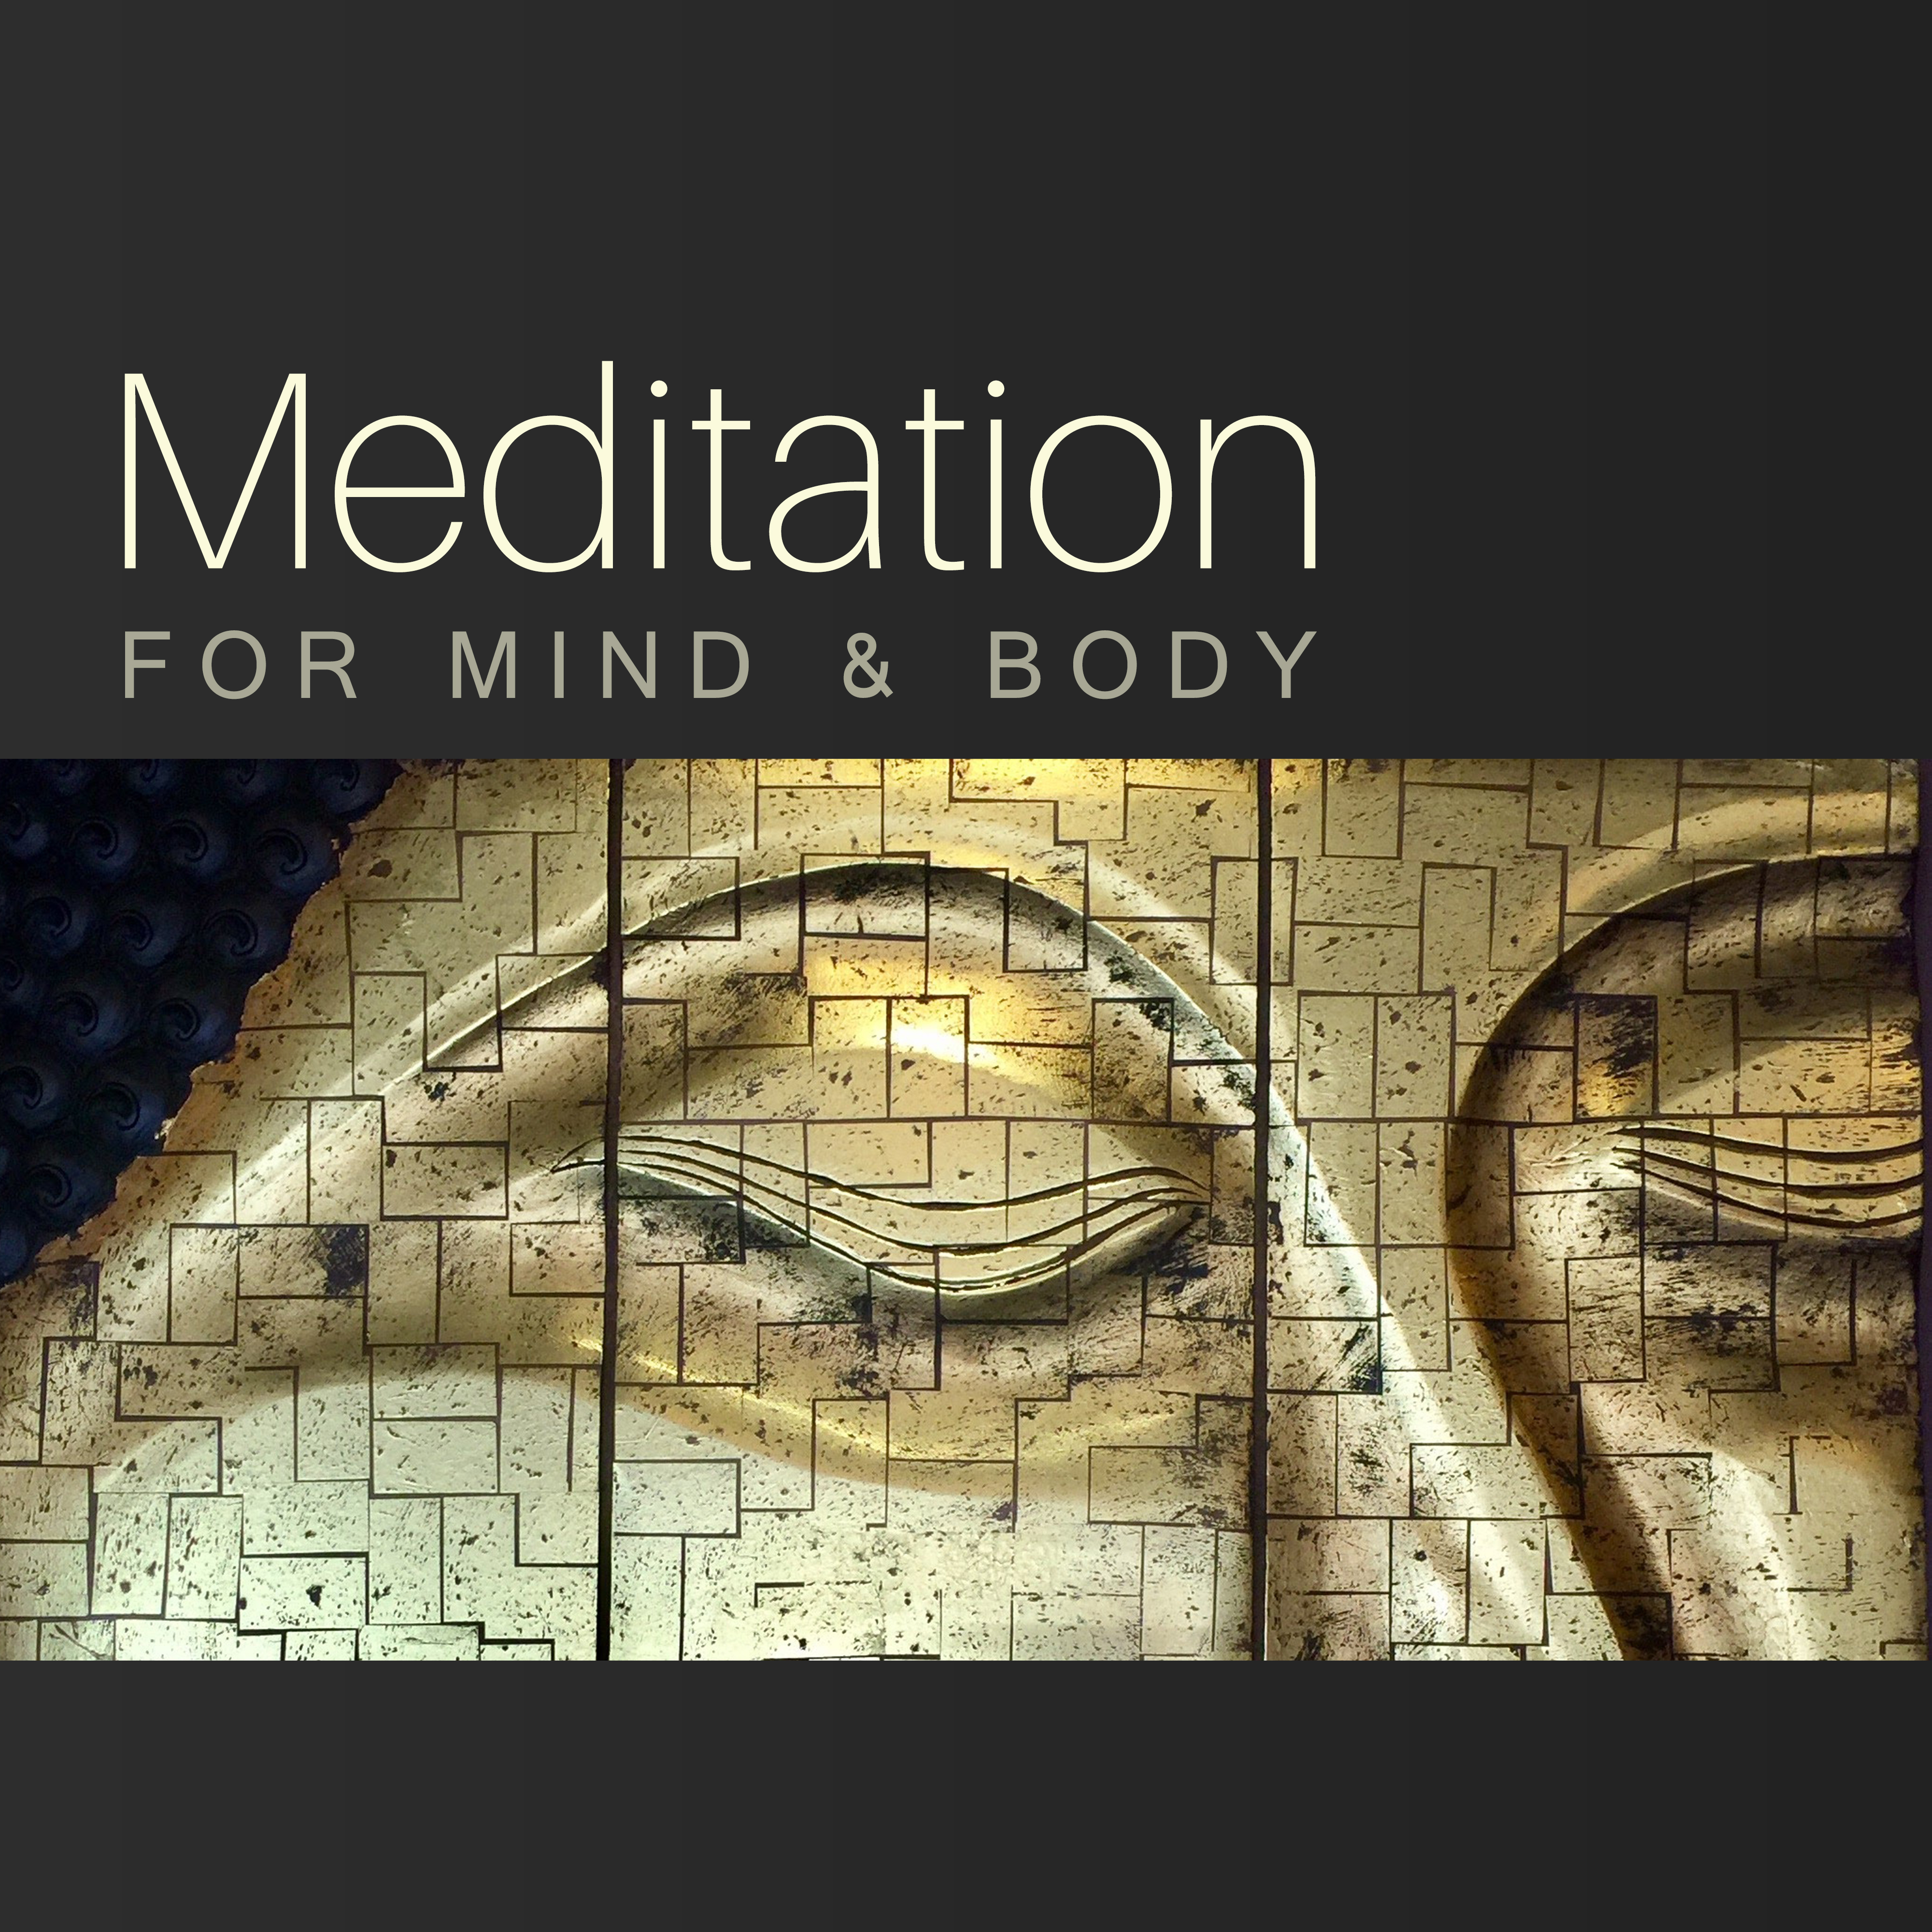 Meditation for Mind & Body – Yoga Training, Buddha Lounge, Time to Meditate, Sounds to Calm Down